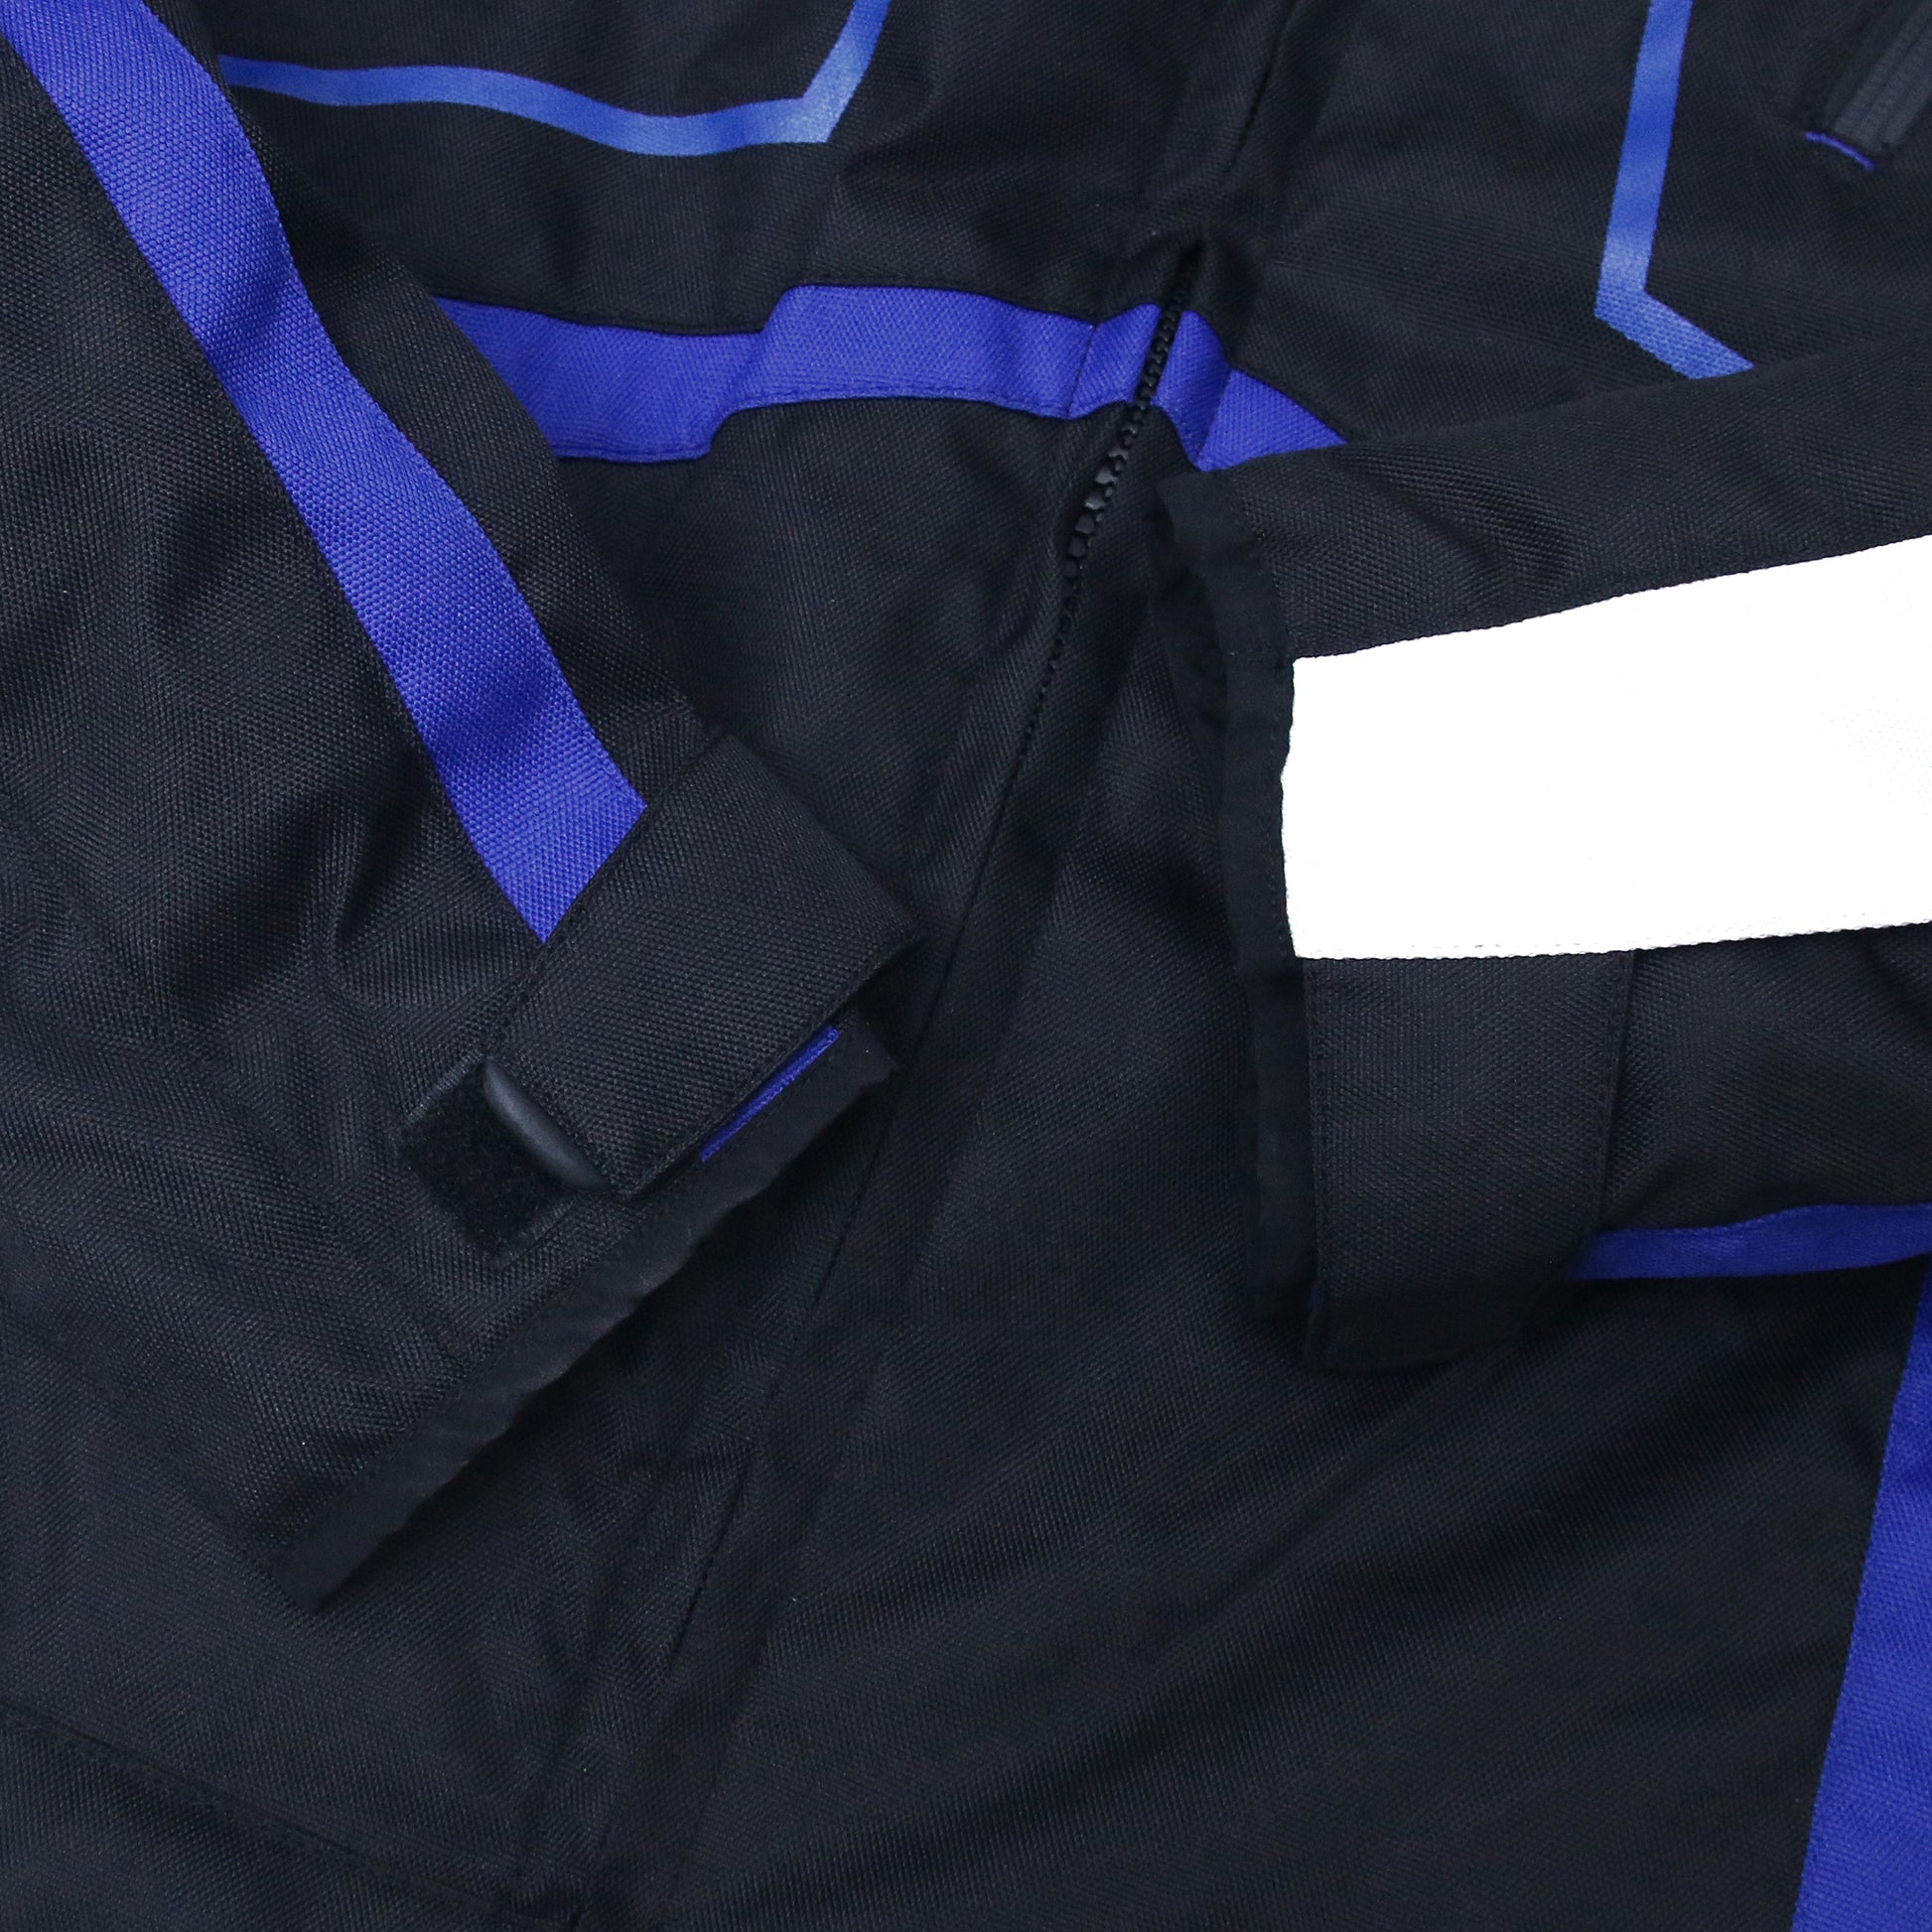 WCL Invader Armoured Textile Jacket - Blue wclapparel